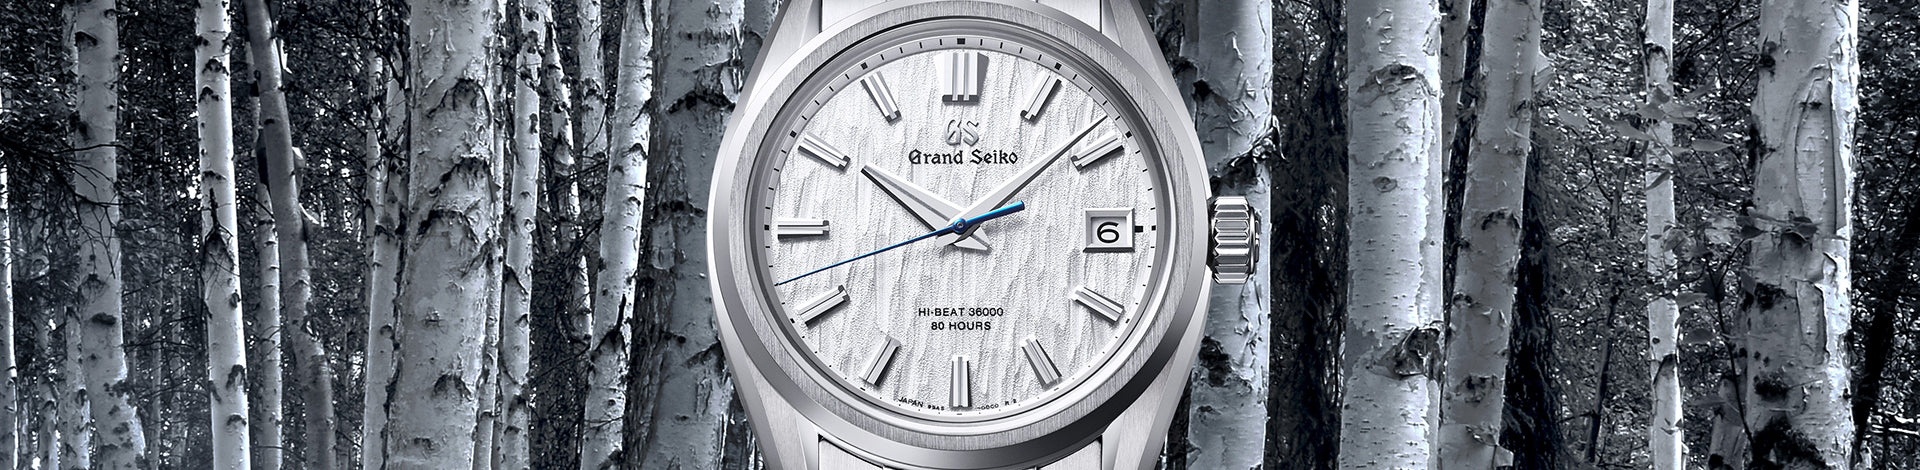 Discover the Grand Seiko watch collections at J Farren-Price including Grand Seiko Elegance, Grand Seiko Evolution 9, Grand Seiko Heritage and Grand Seiko Sport. Each collection of Grand Seiko Luxury Watches shares functional beauty and design purity that has always been its hallmark